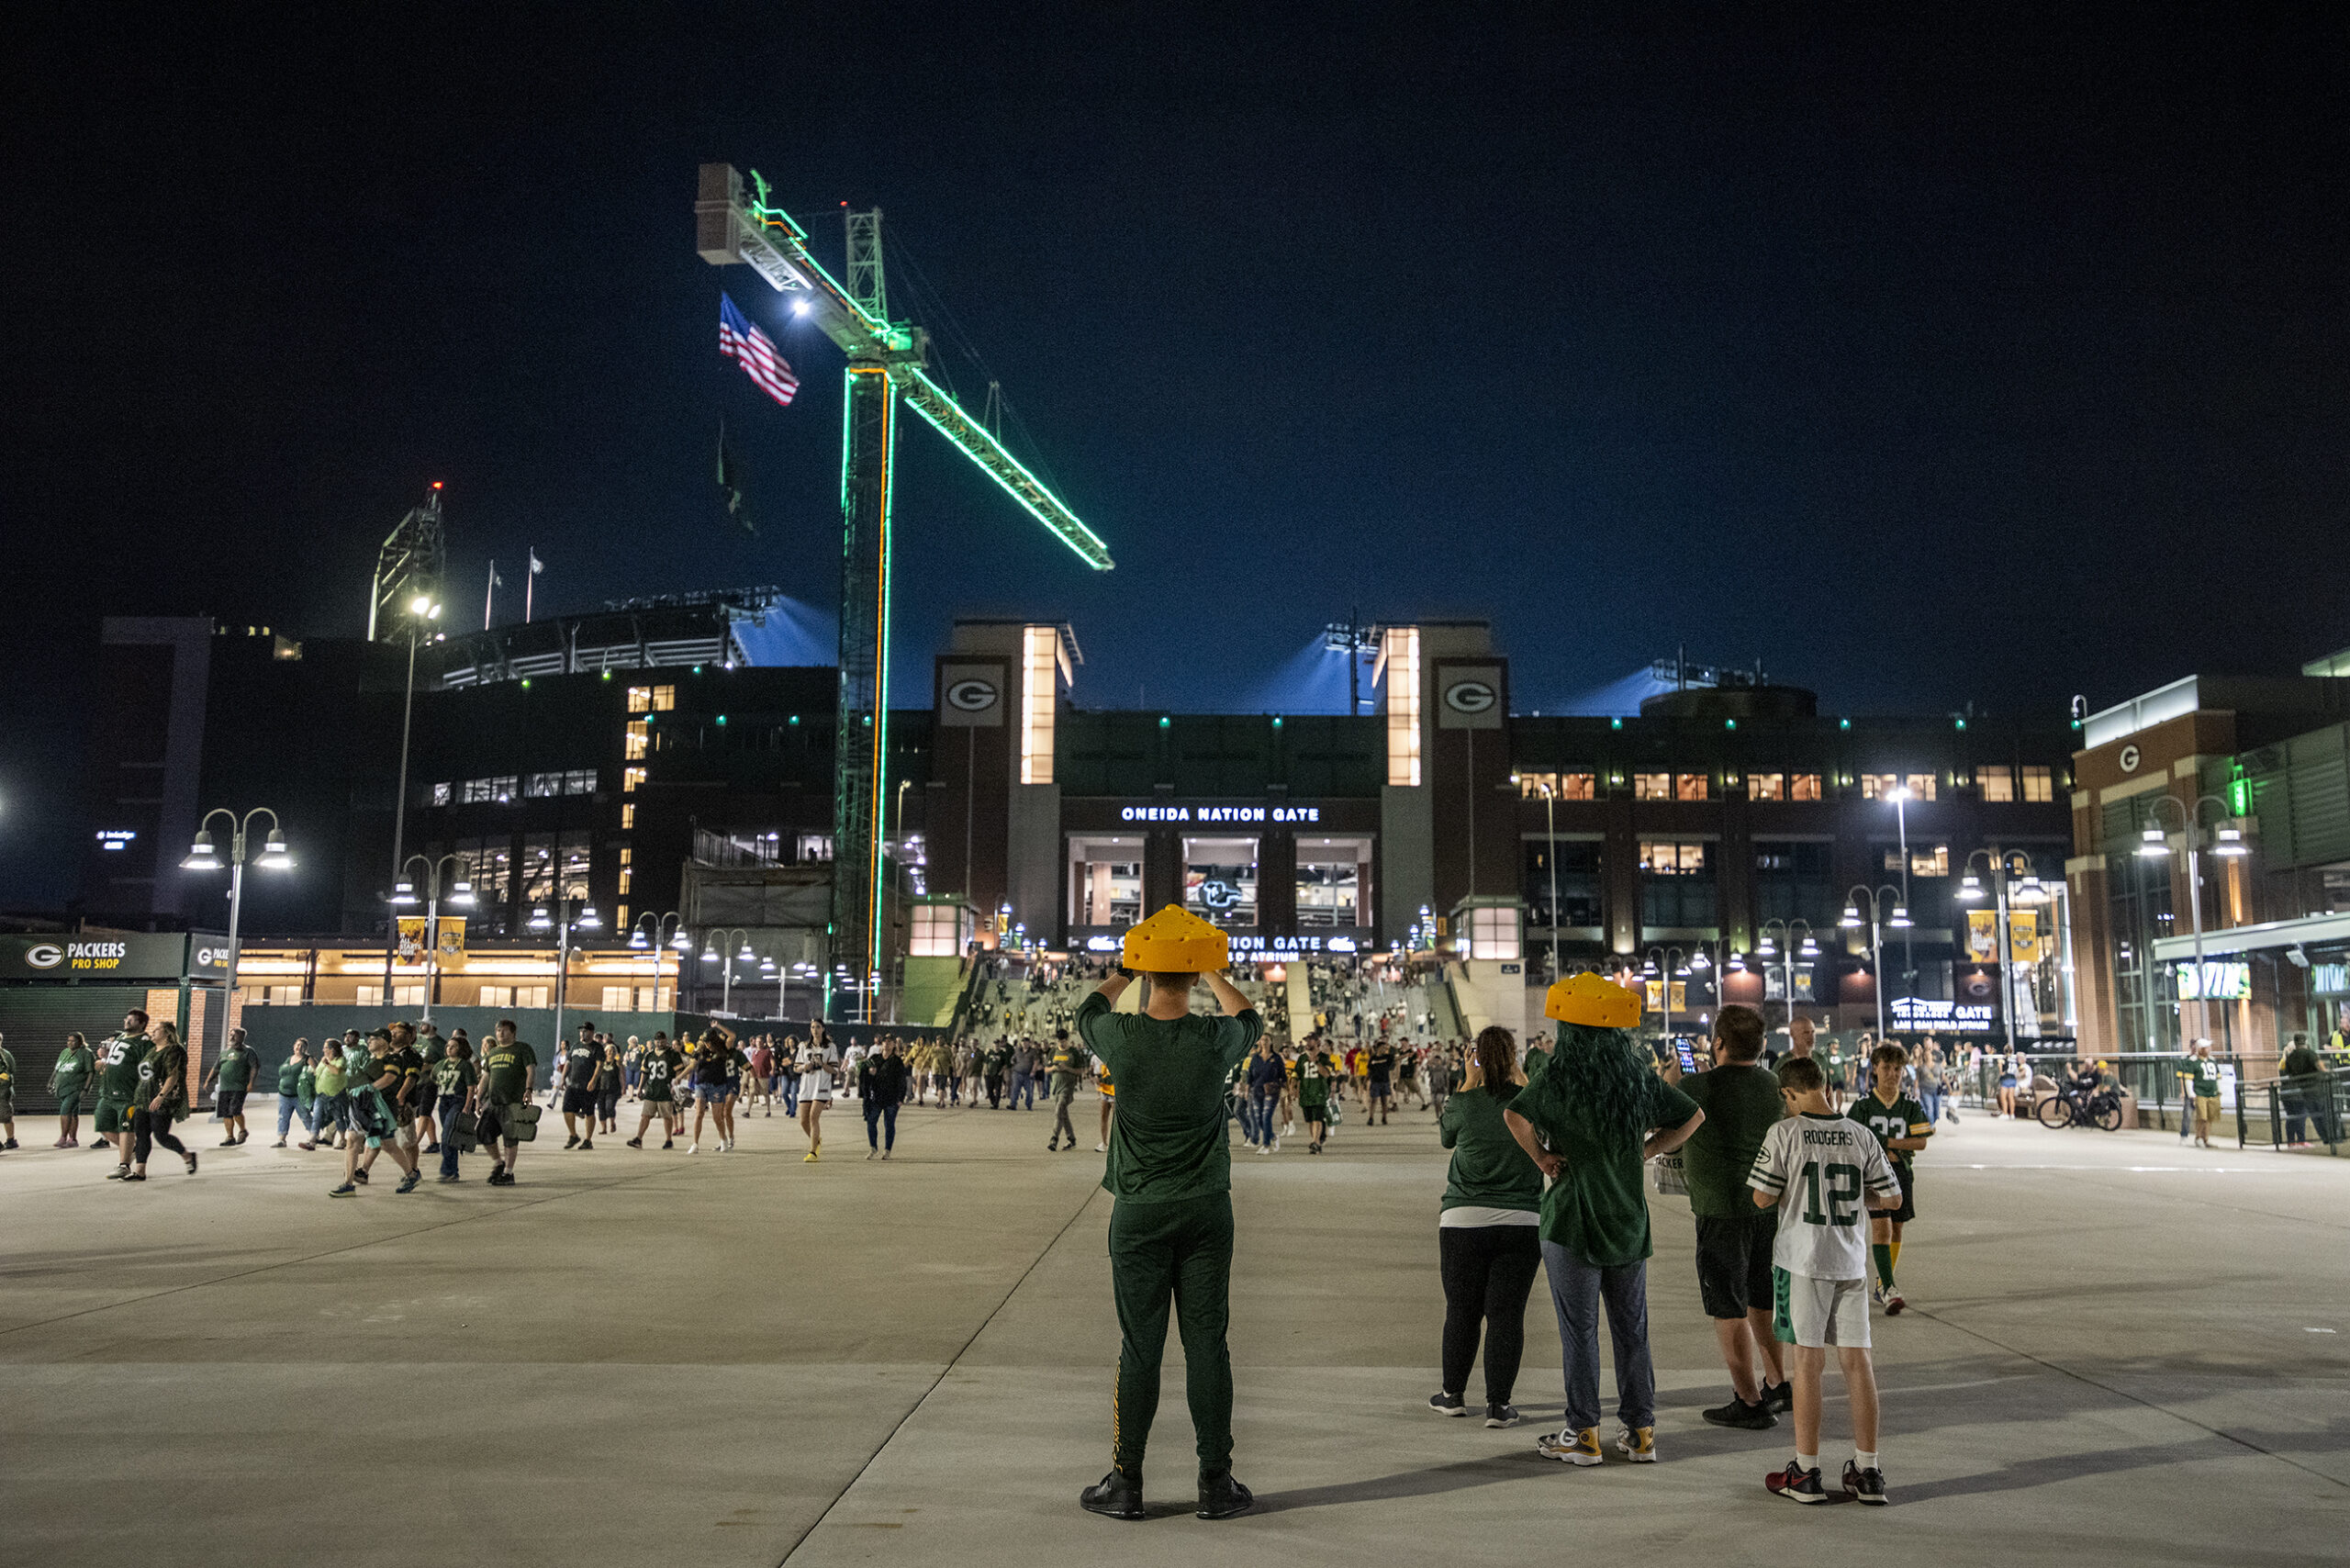 Have the Packers’ struggles on the field hurt Green Bay’s economy?